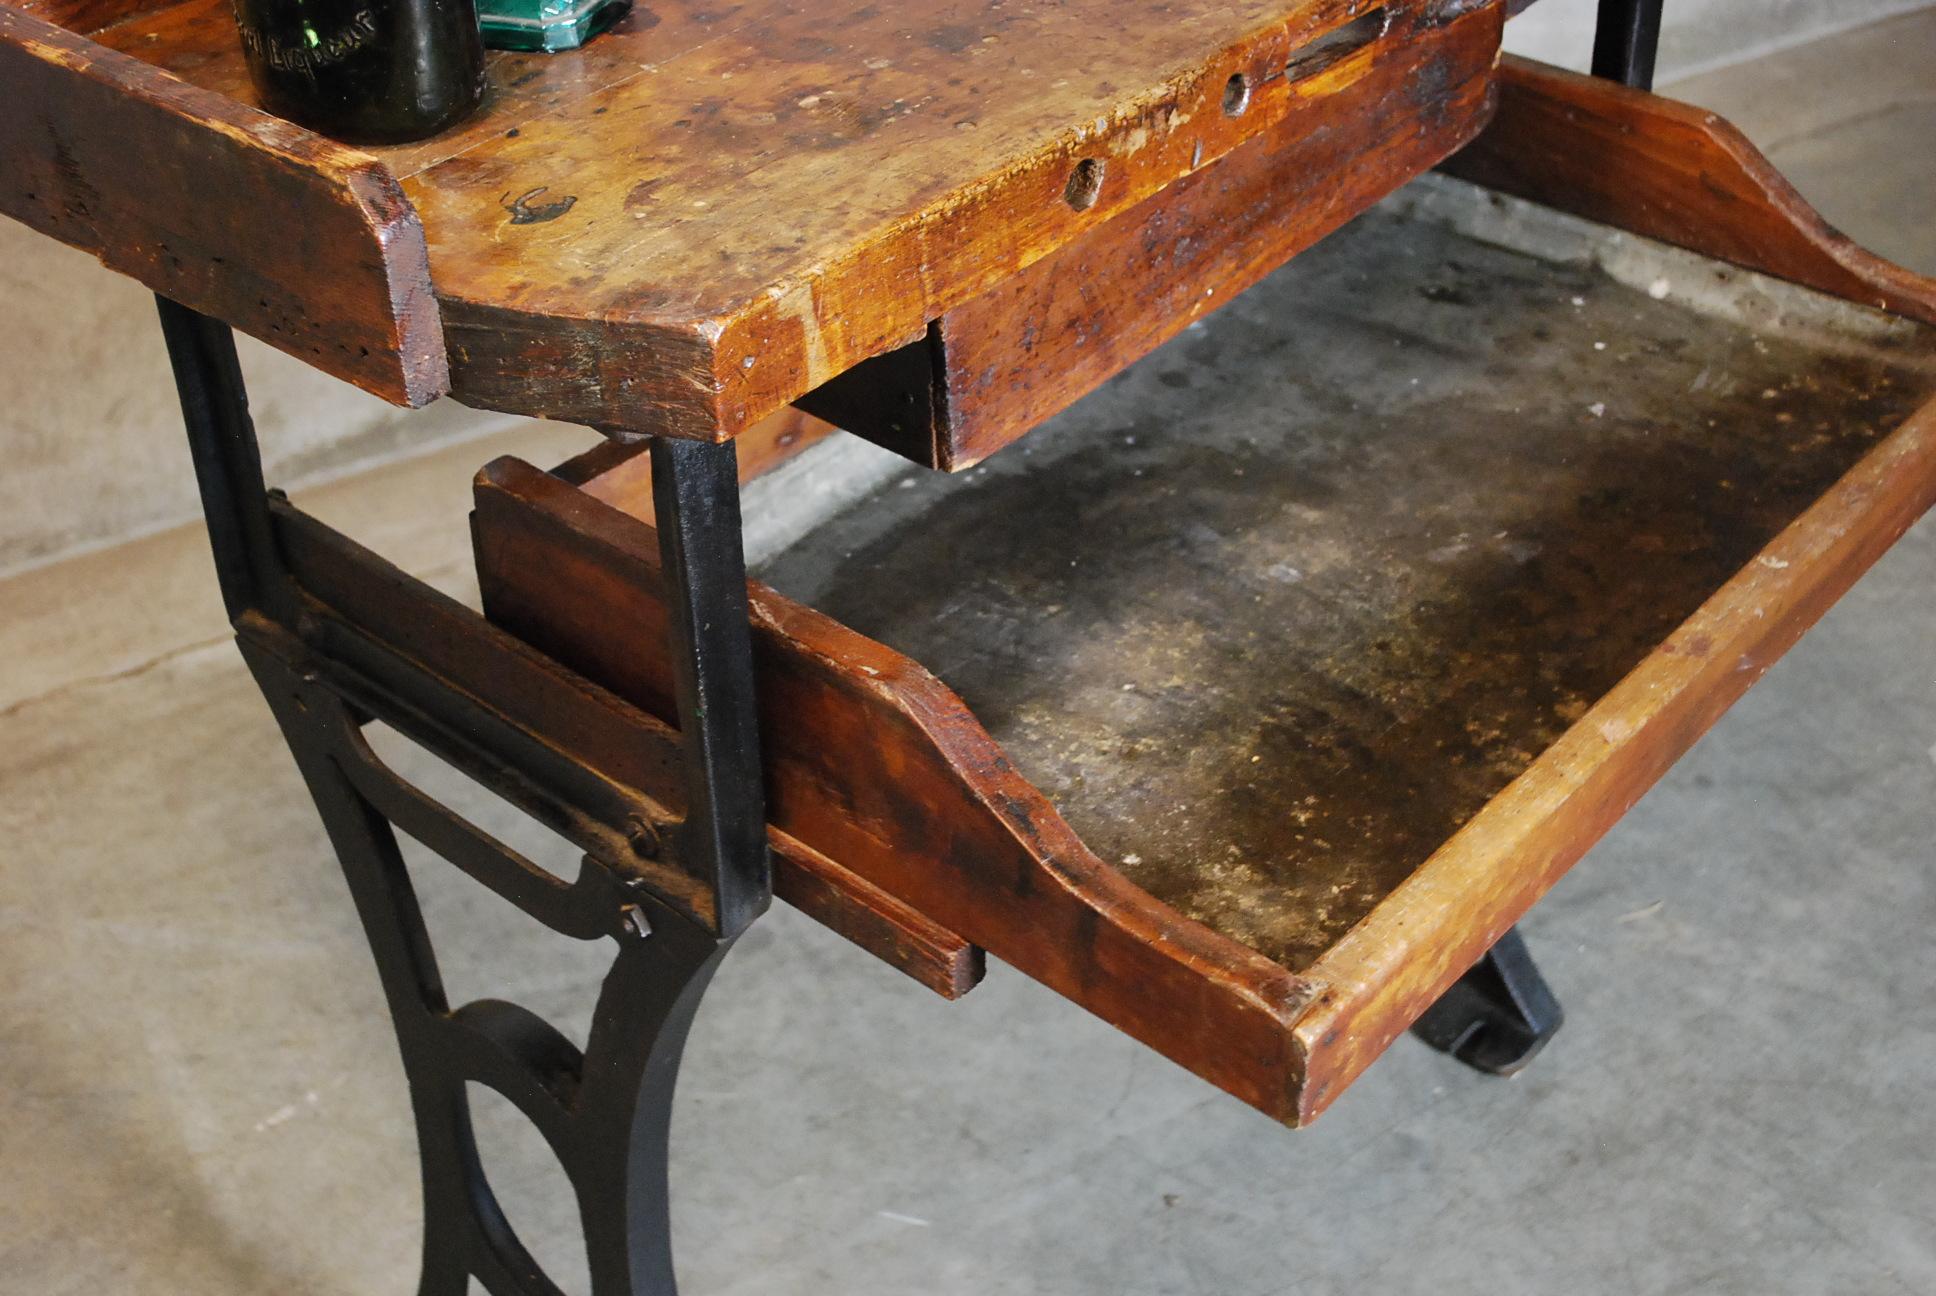 Vintage, 1930s, Industrial, jeweler's bench or table features a beautifully rustic, work worn maple top stained to a walnut finish with two pull-out drawers in a cast iron frame.
Excellent as found condition.